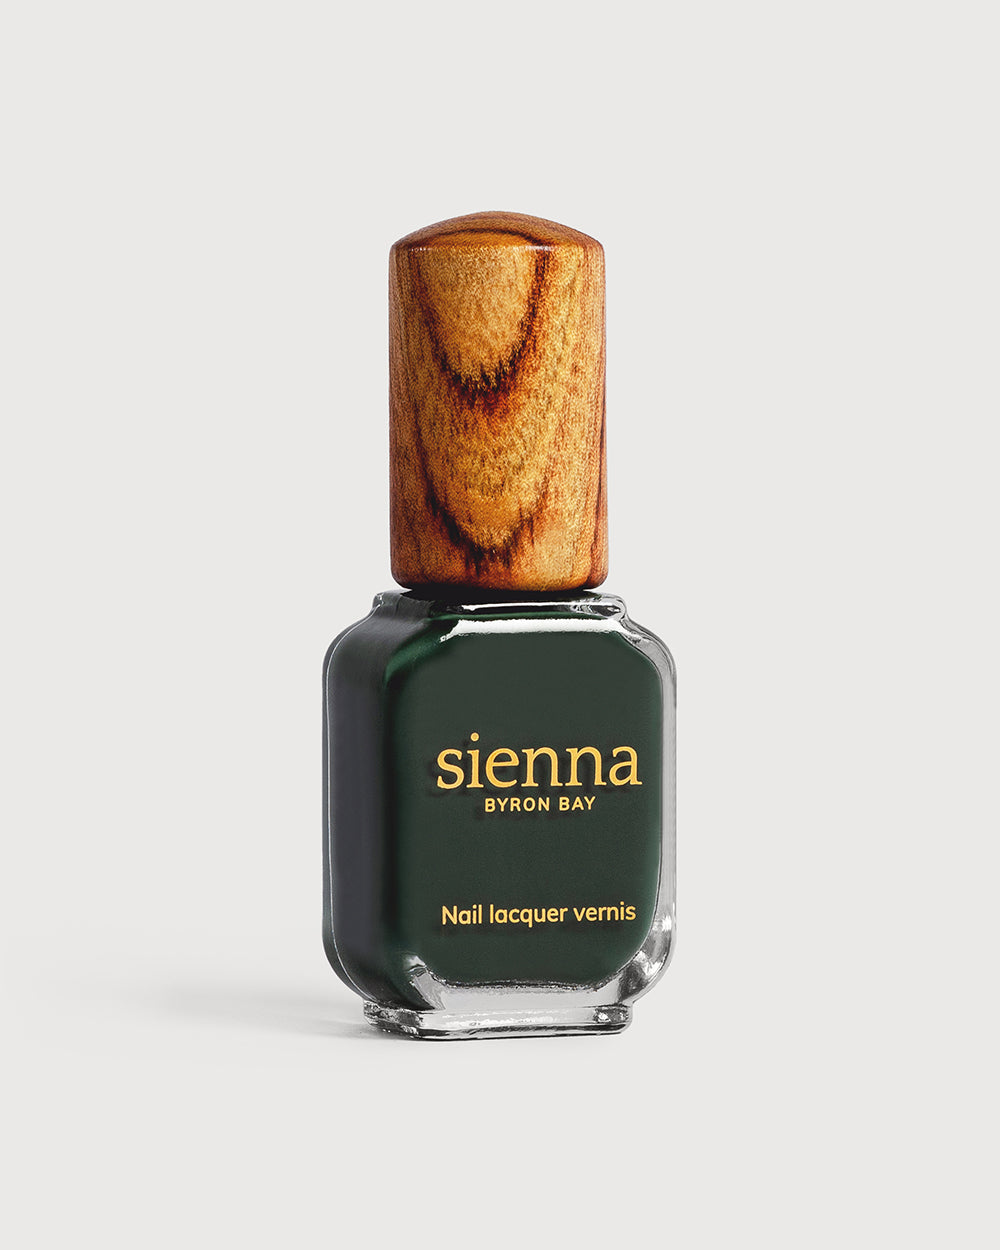 deep olive green nail polish glass bottle with timber cap